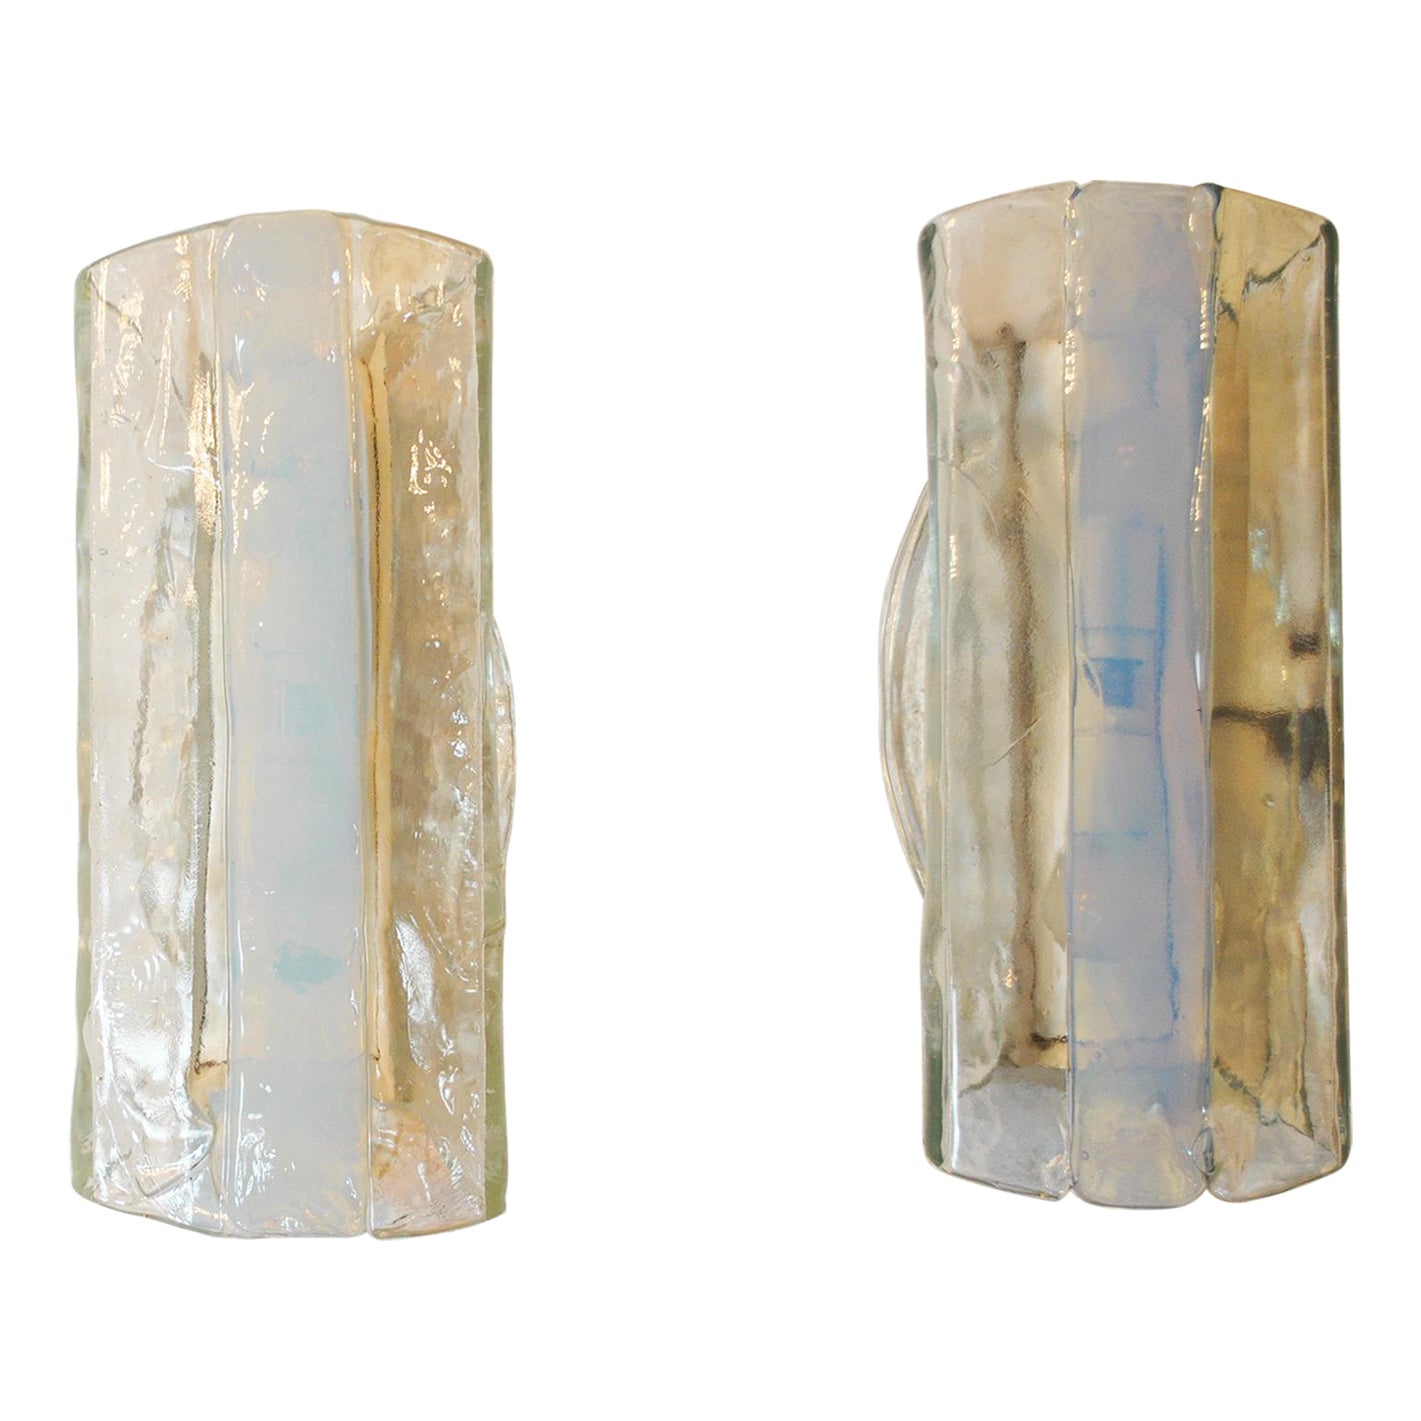 Mazzega Italian Midcentury Murano Sconces from the Late Sixties For Sale